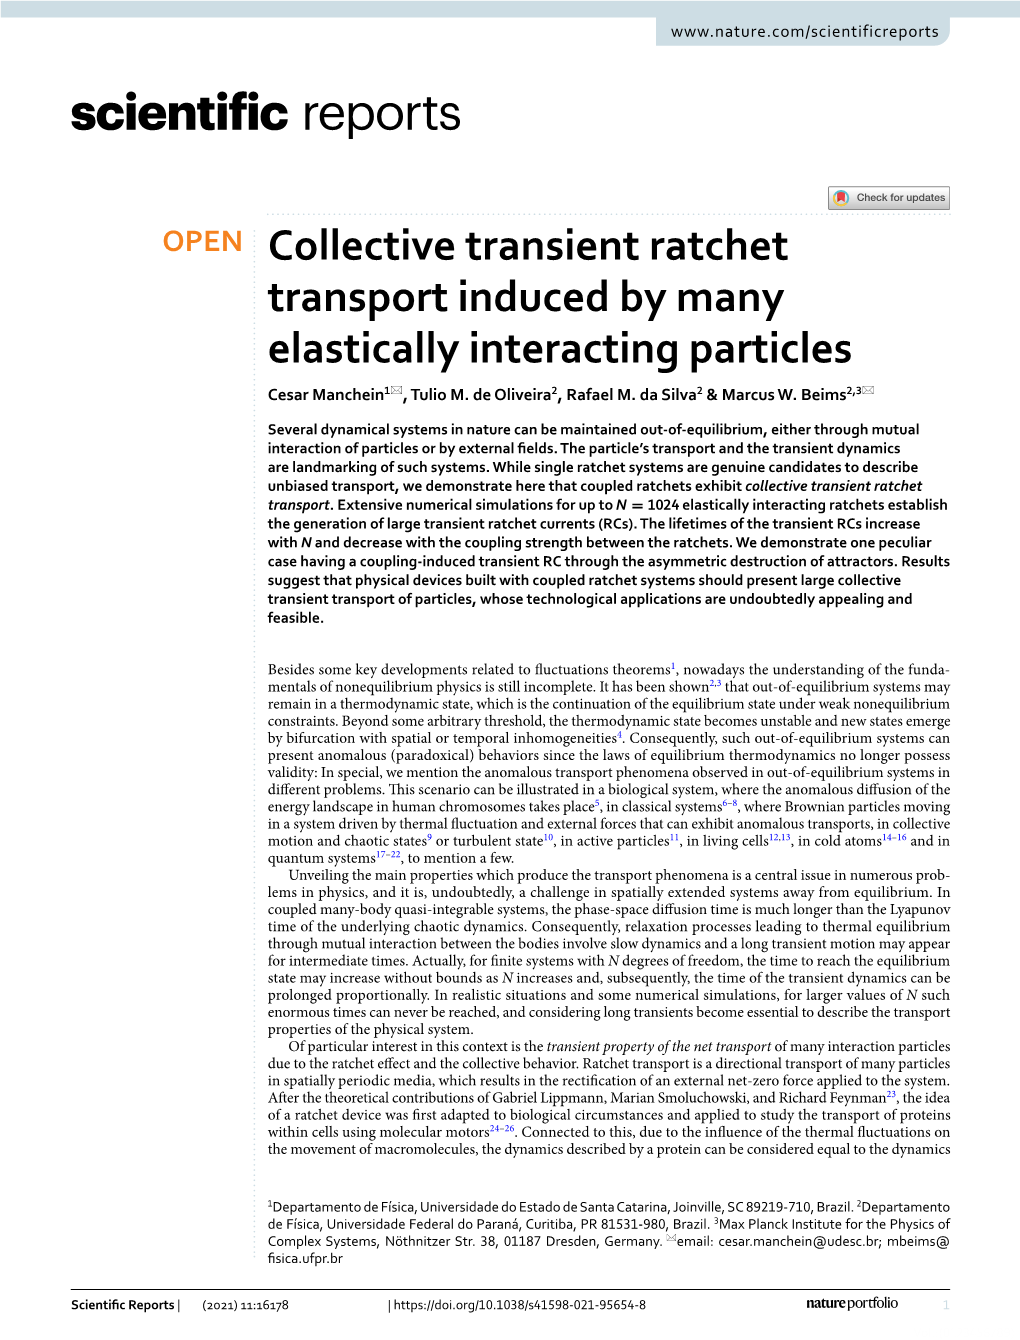 Collective Transient Ratchet Transport Induced by Many Elastically Interacting Particles Cesar Manchein1*, Tulio M